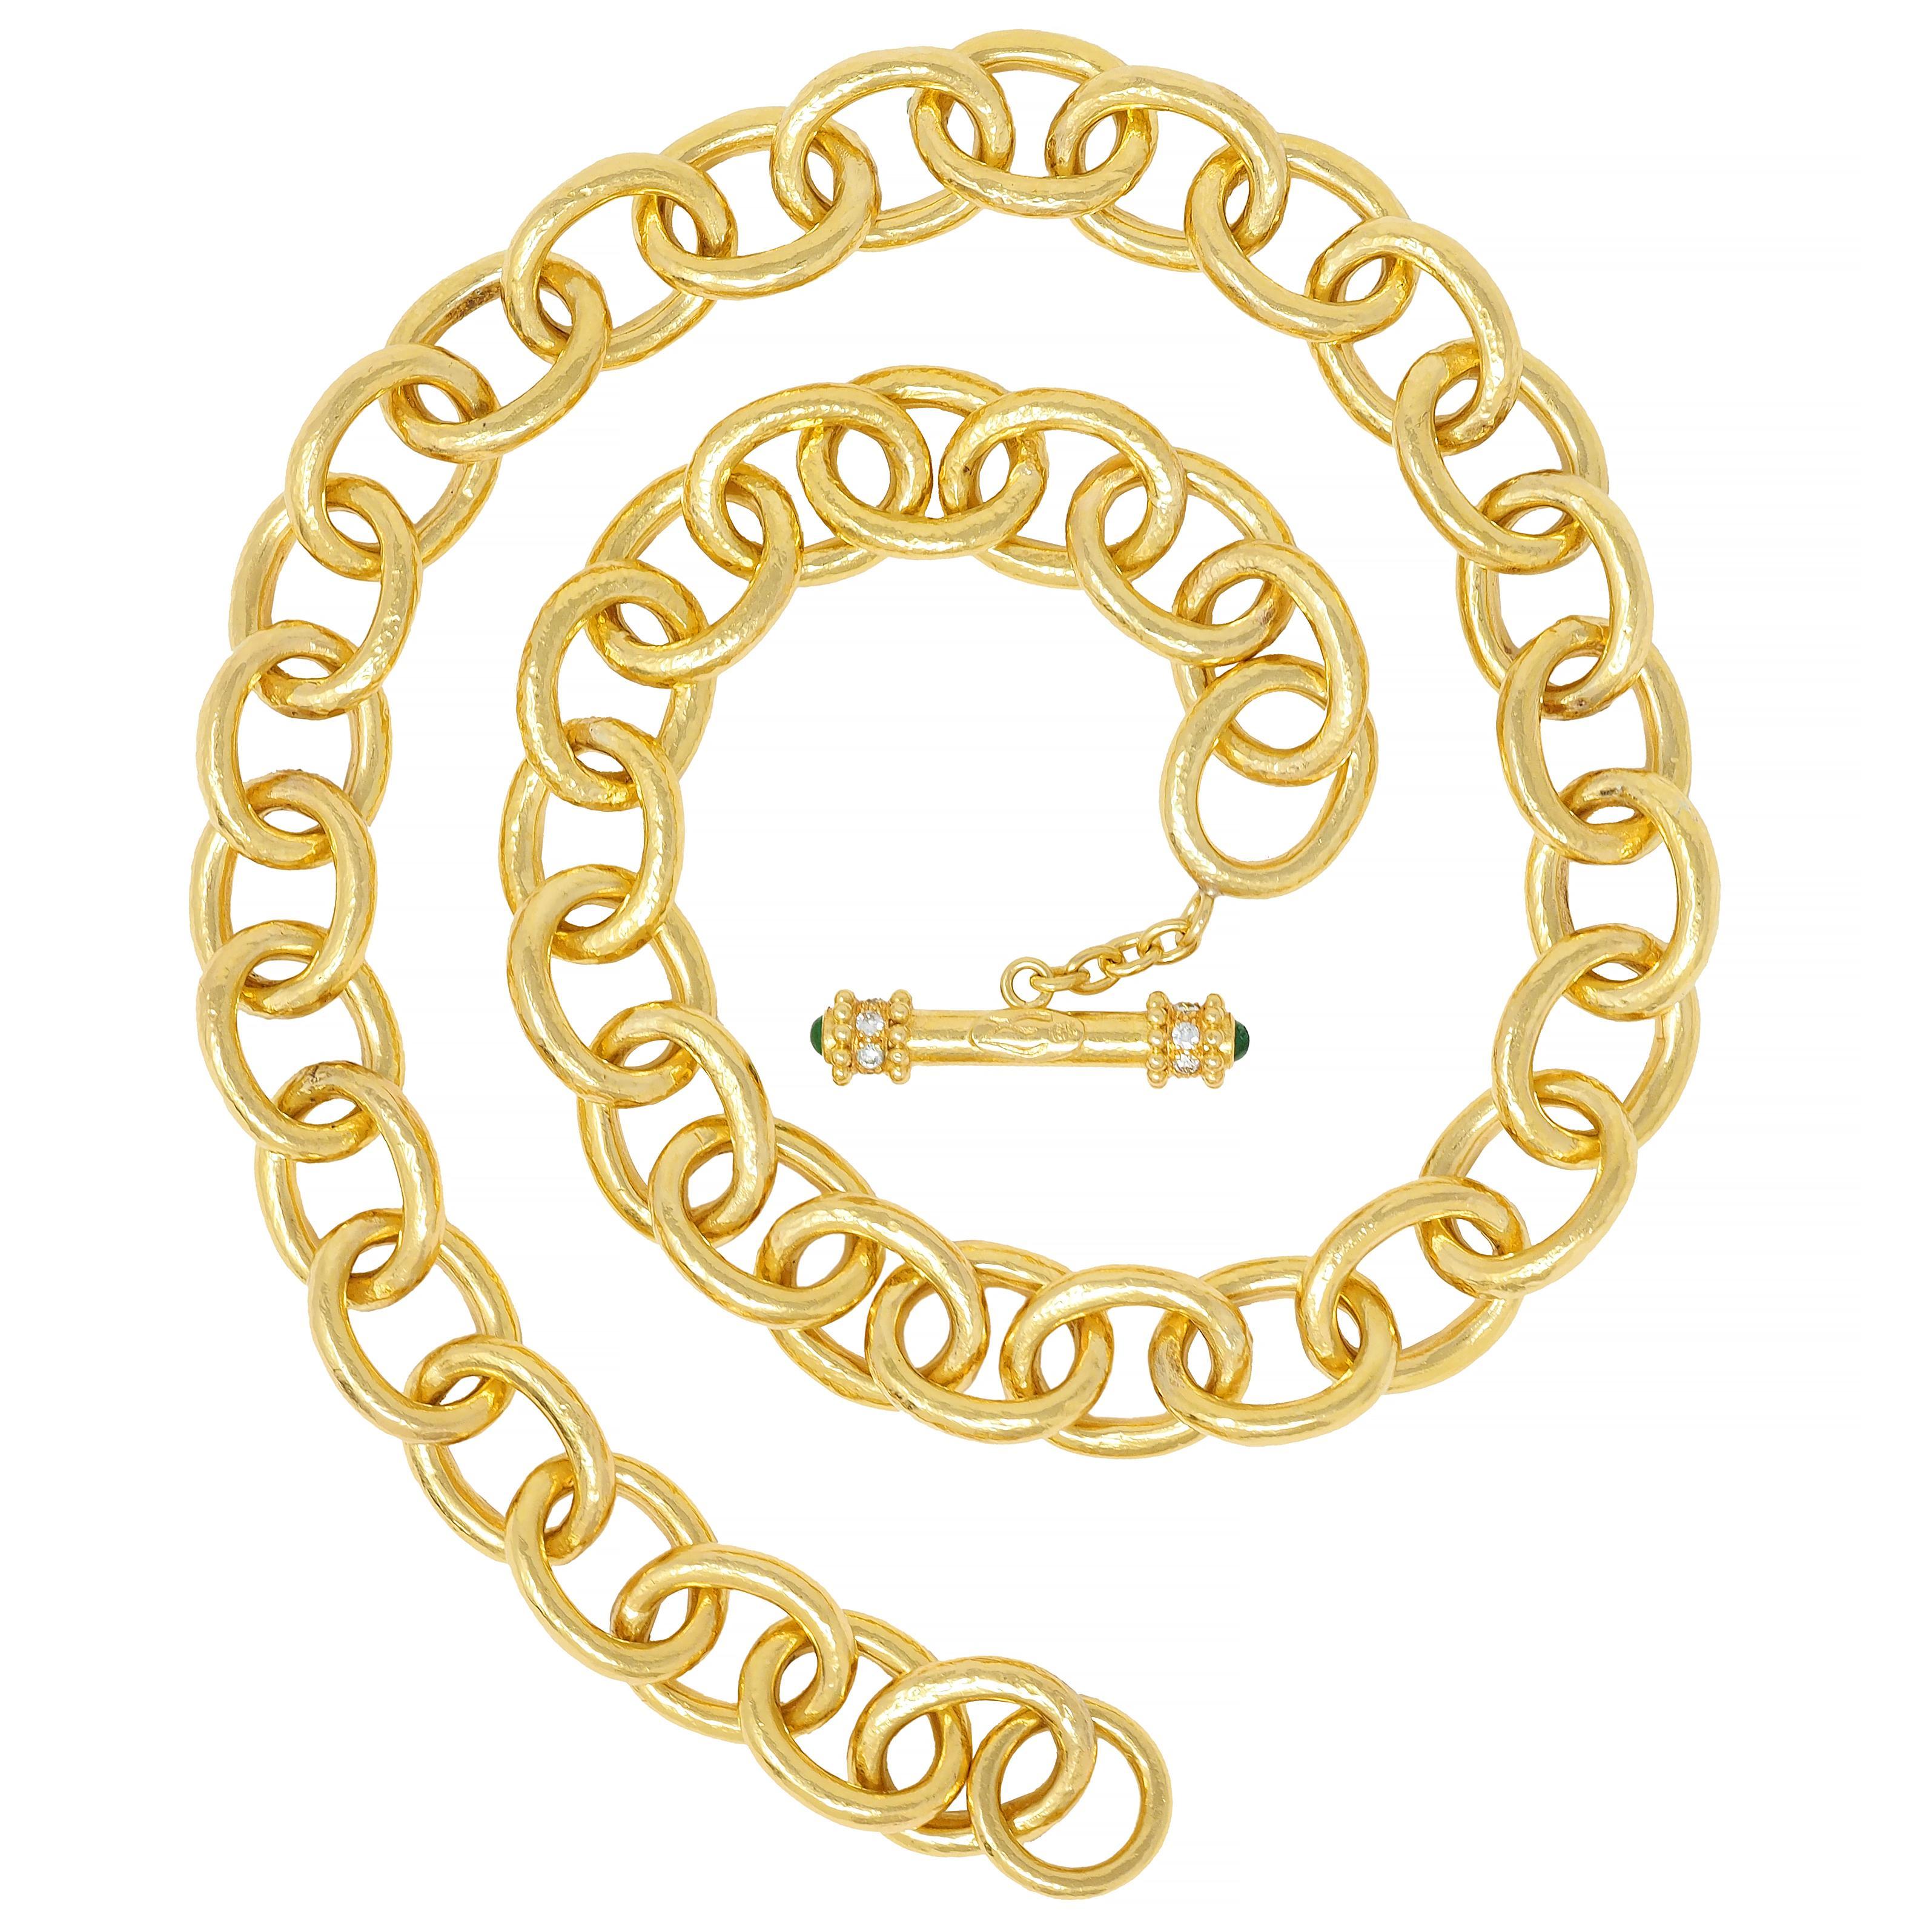 Designed as a cable link chain comprised of large oval-shaped hammered links 
With a stylized toggle clasp accented by round brilliant cut diamonds
Weighing approximately 0.36 carat total - eye clean and bright
Toggle terminates with 3.0 mm round